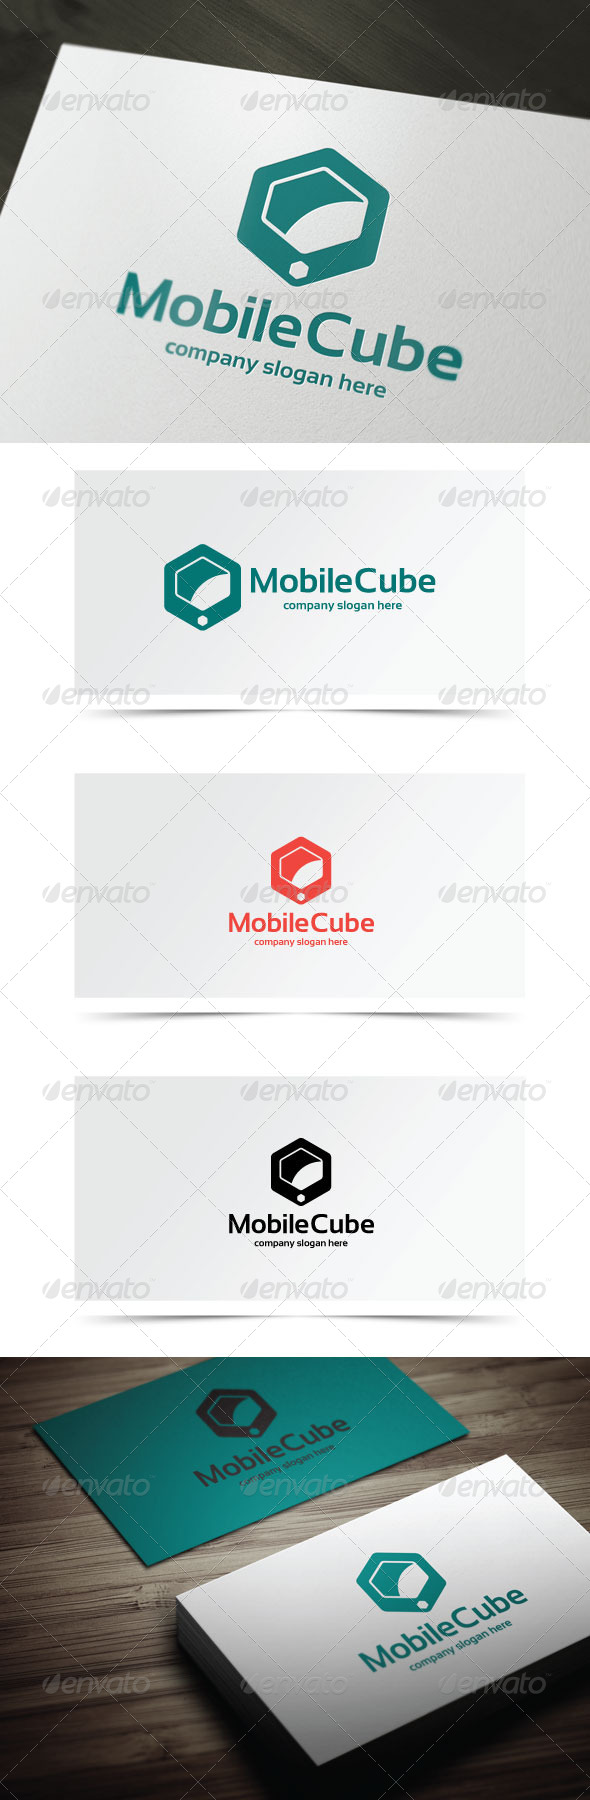 Mobile Cube